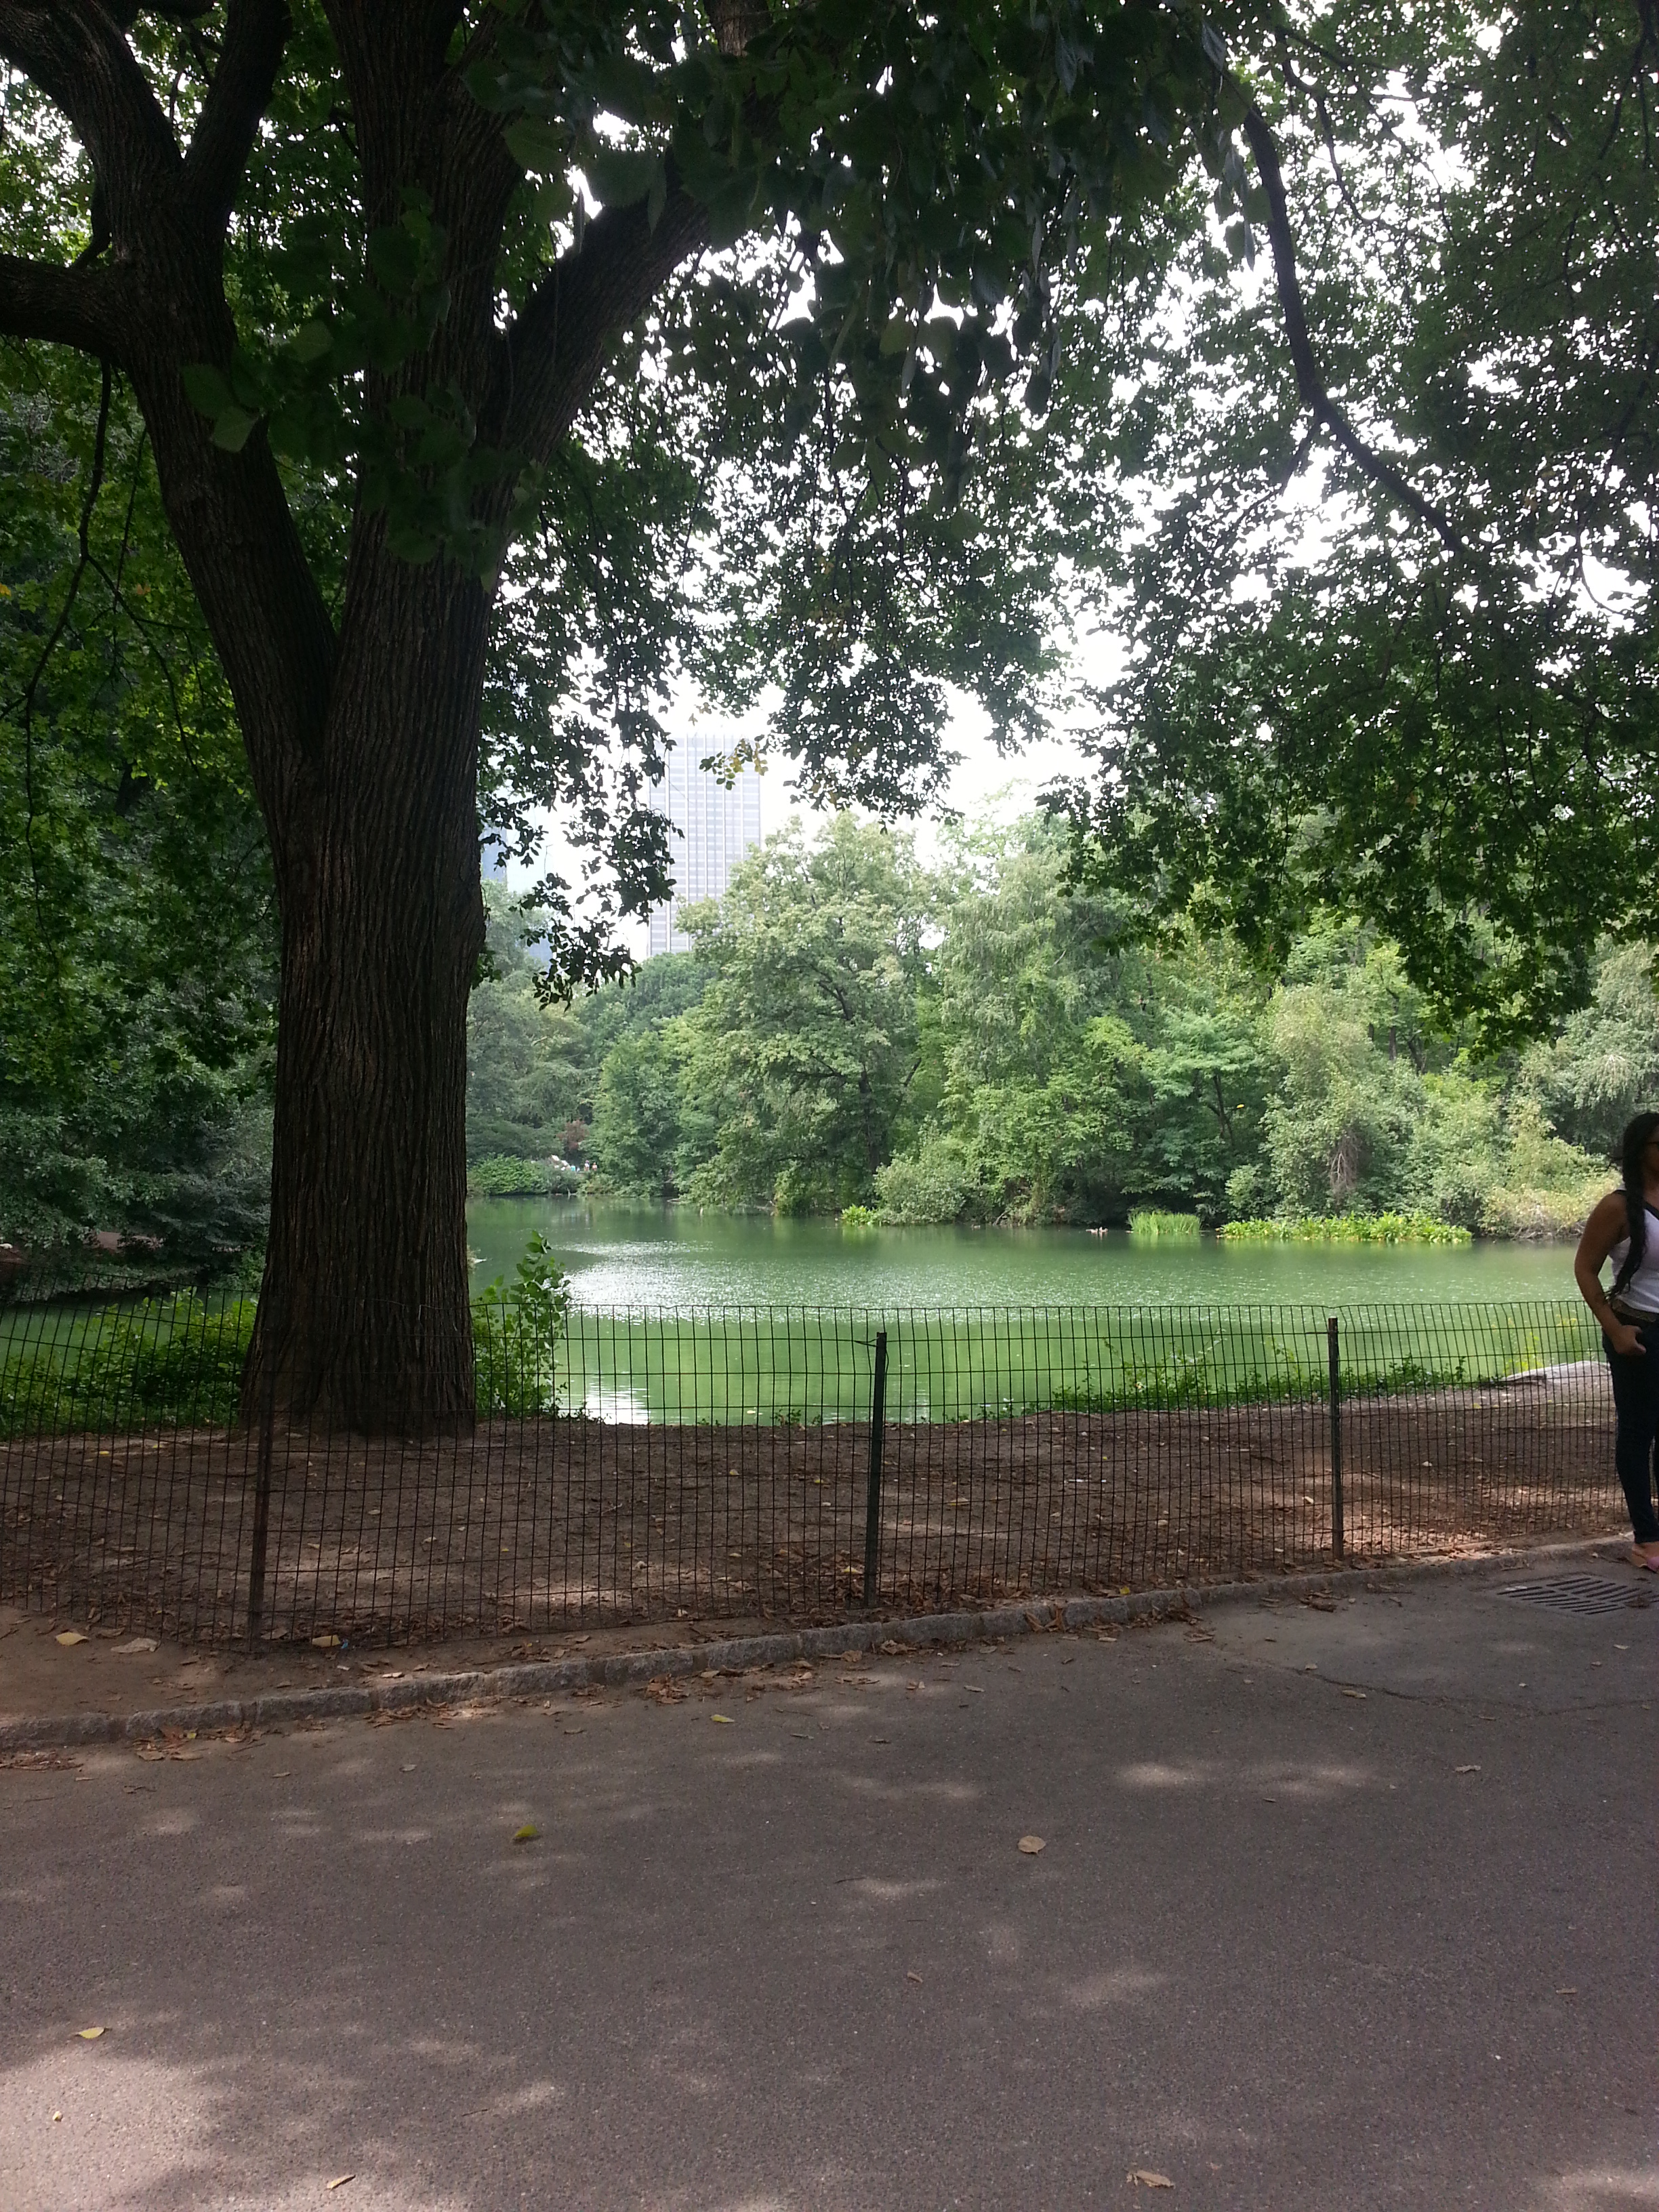 TIme to Get Away - New York City Parks - FINDS Blog